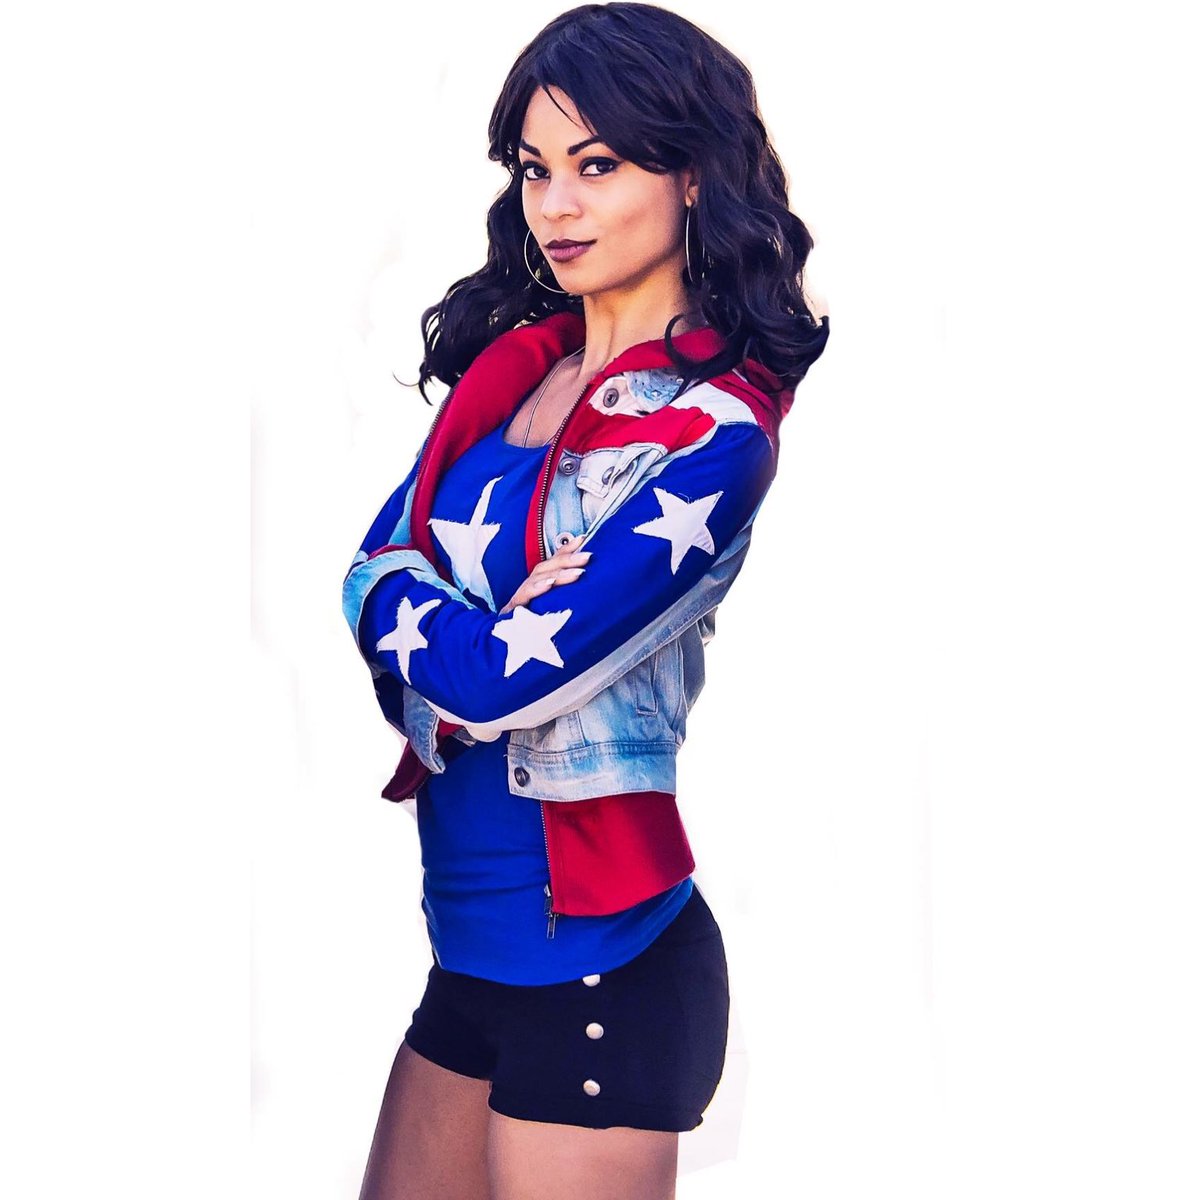 America is ready for mid-week sass. #missamericachavez #cosplay #youngaveng...